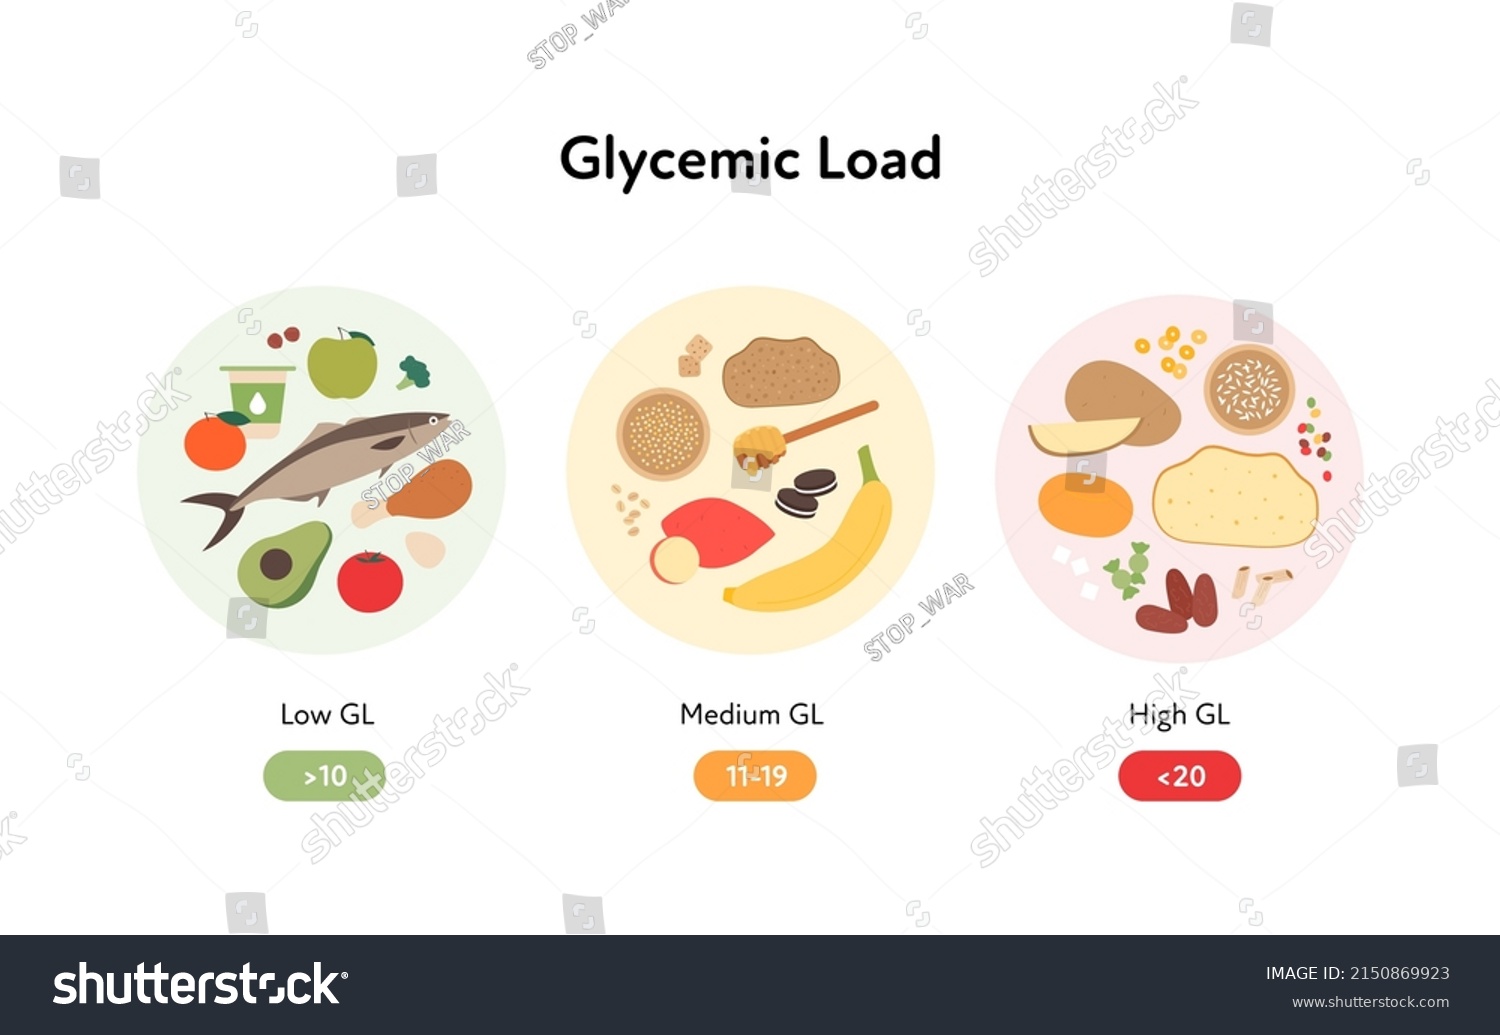 Glycemic Load Infographic Diabetics Concept Vector Stock Vector Royalty Free